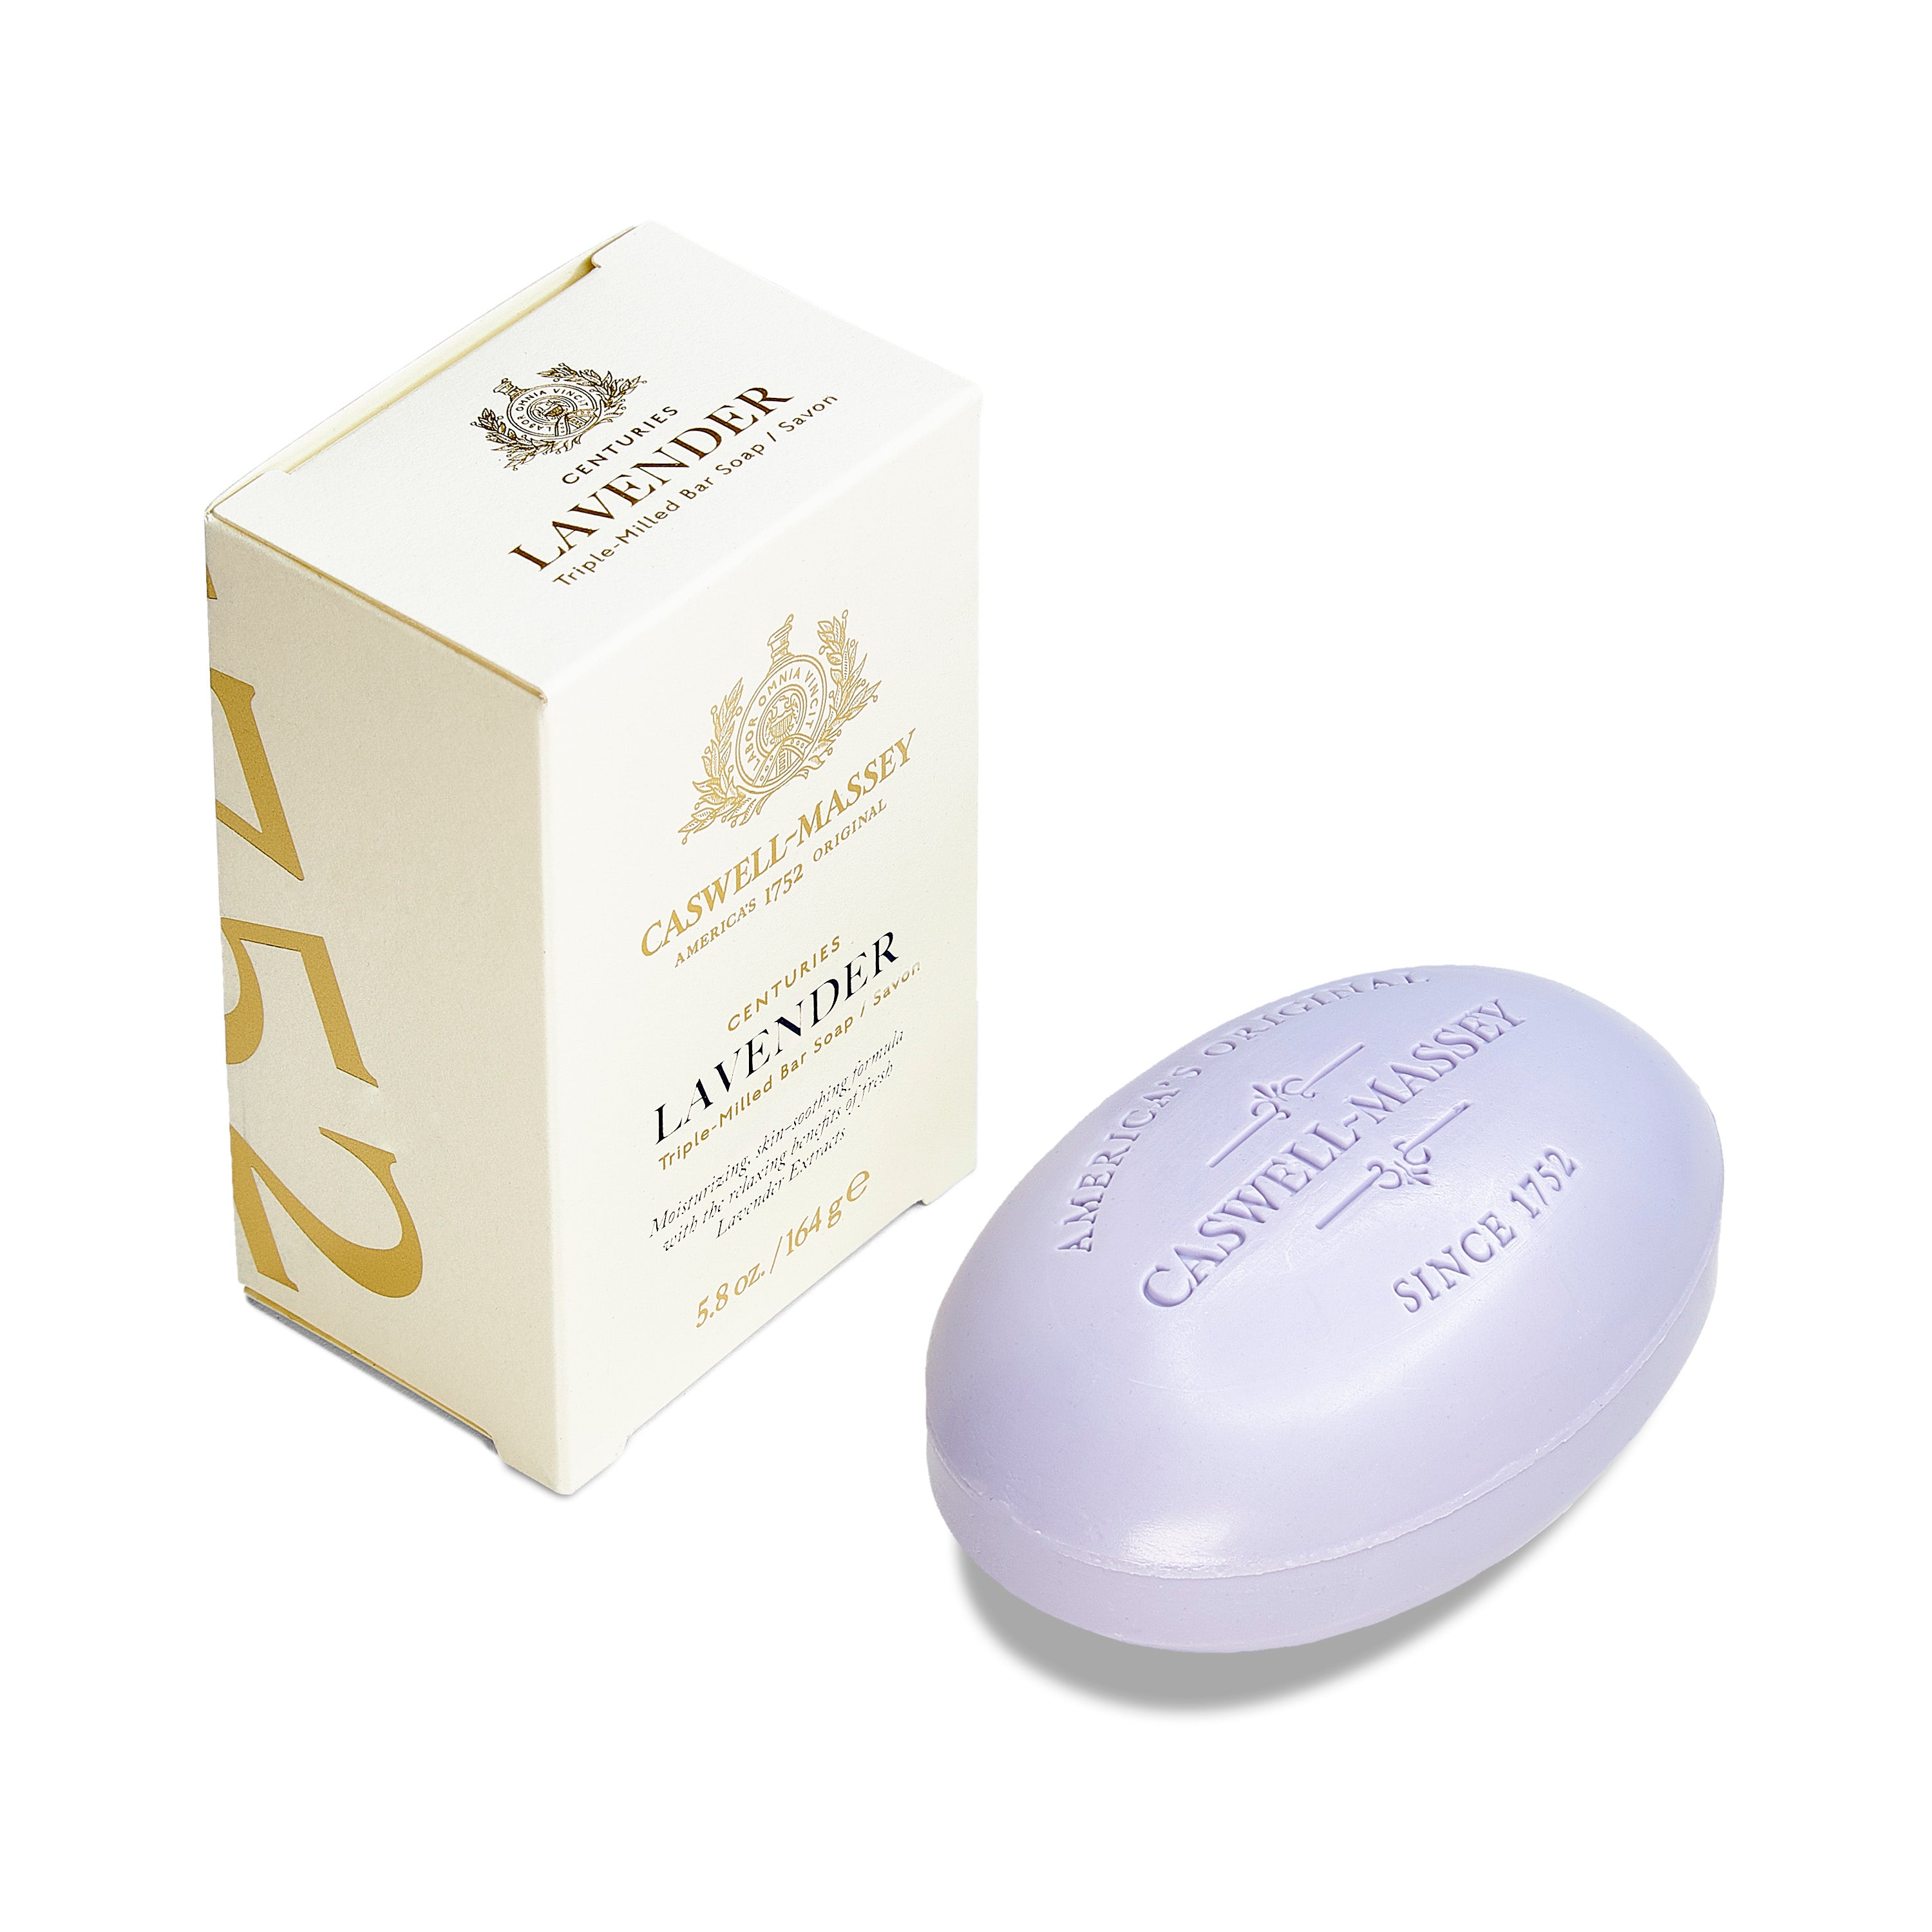 Caswell-Massey® Centuries Lavender Bar Soap shown next to cream box